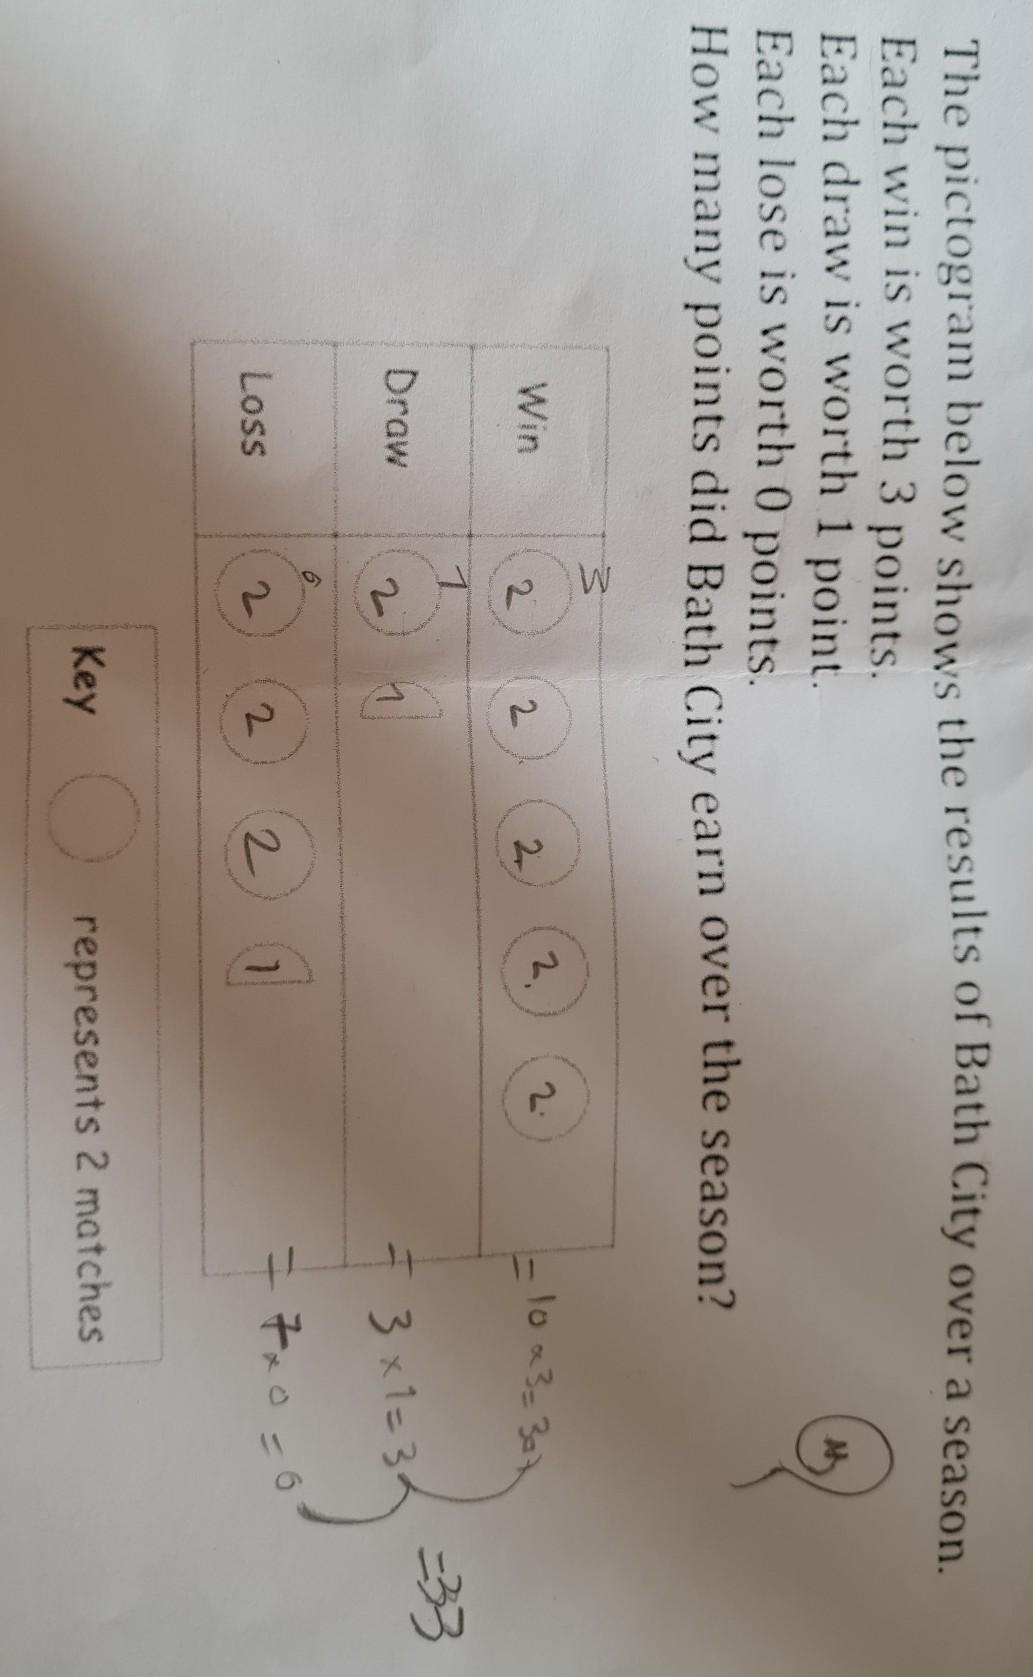 Please Help Me With This Math Question.Each Win Is Worth 3 Points.Each Draw Is Worth 1 Point.Each Lose